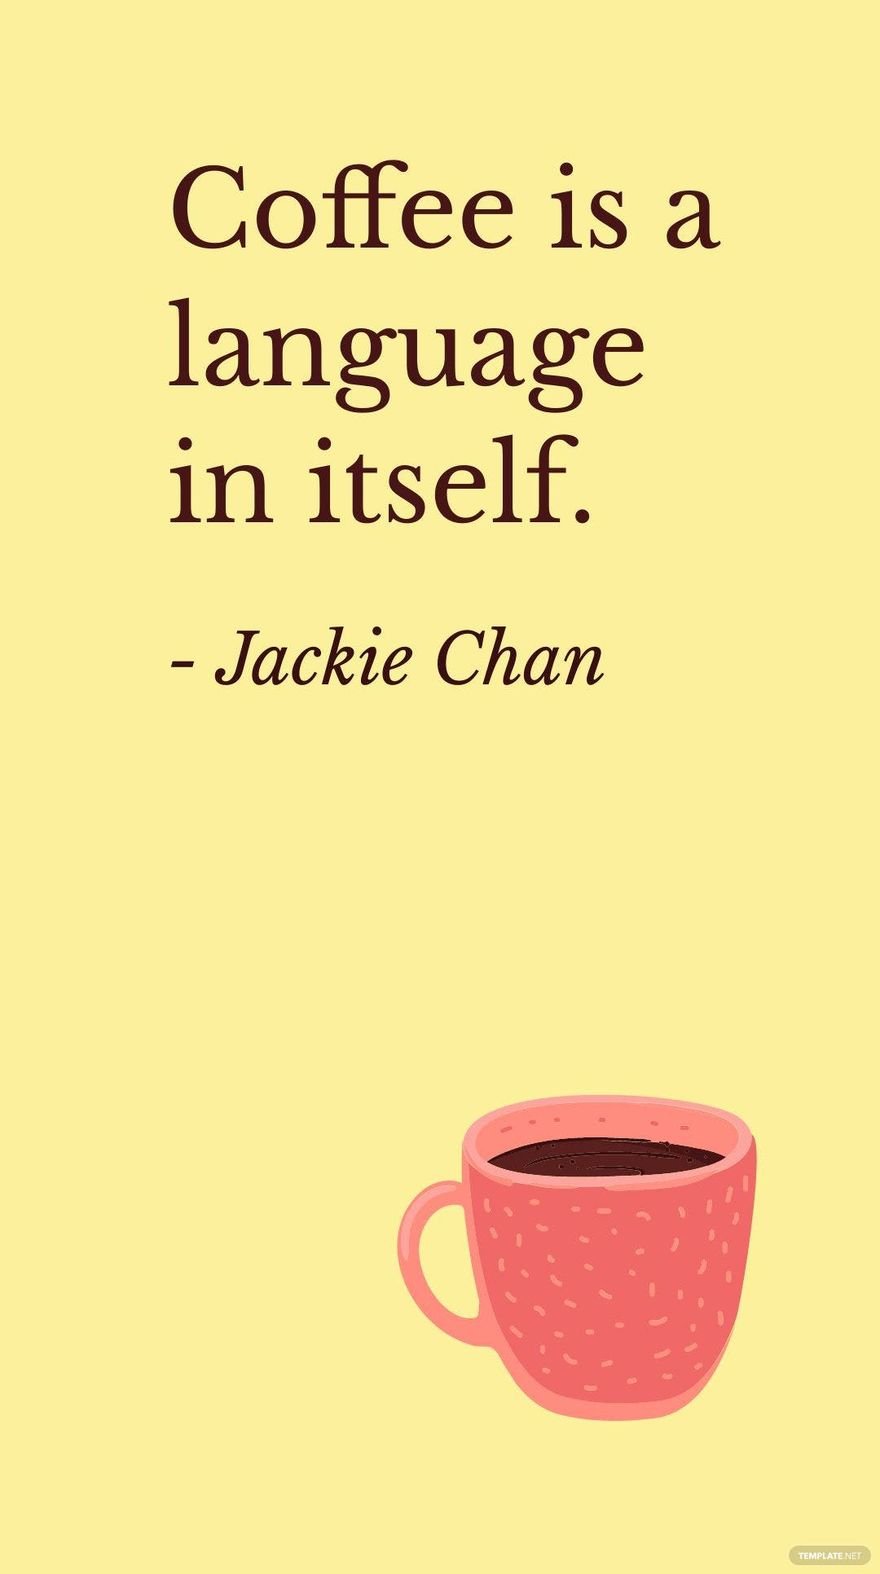 Jackie Chan - Coffee is a language in itself.